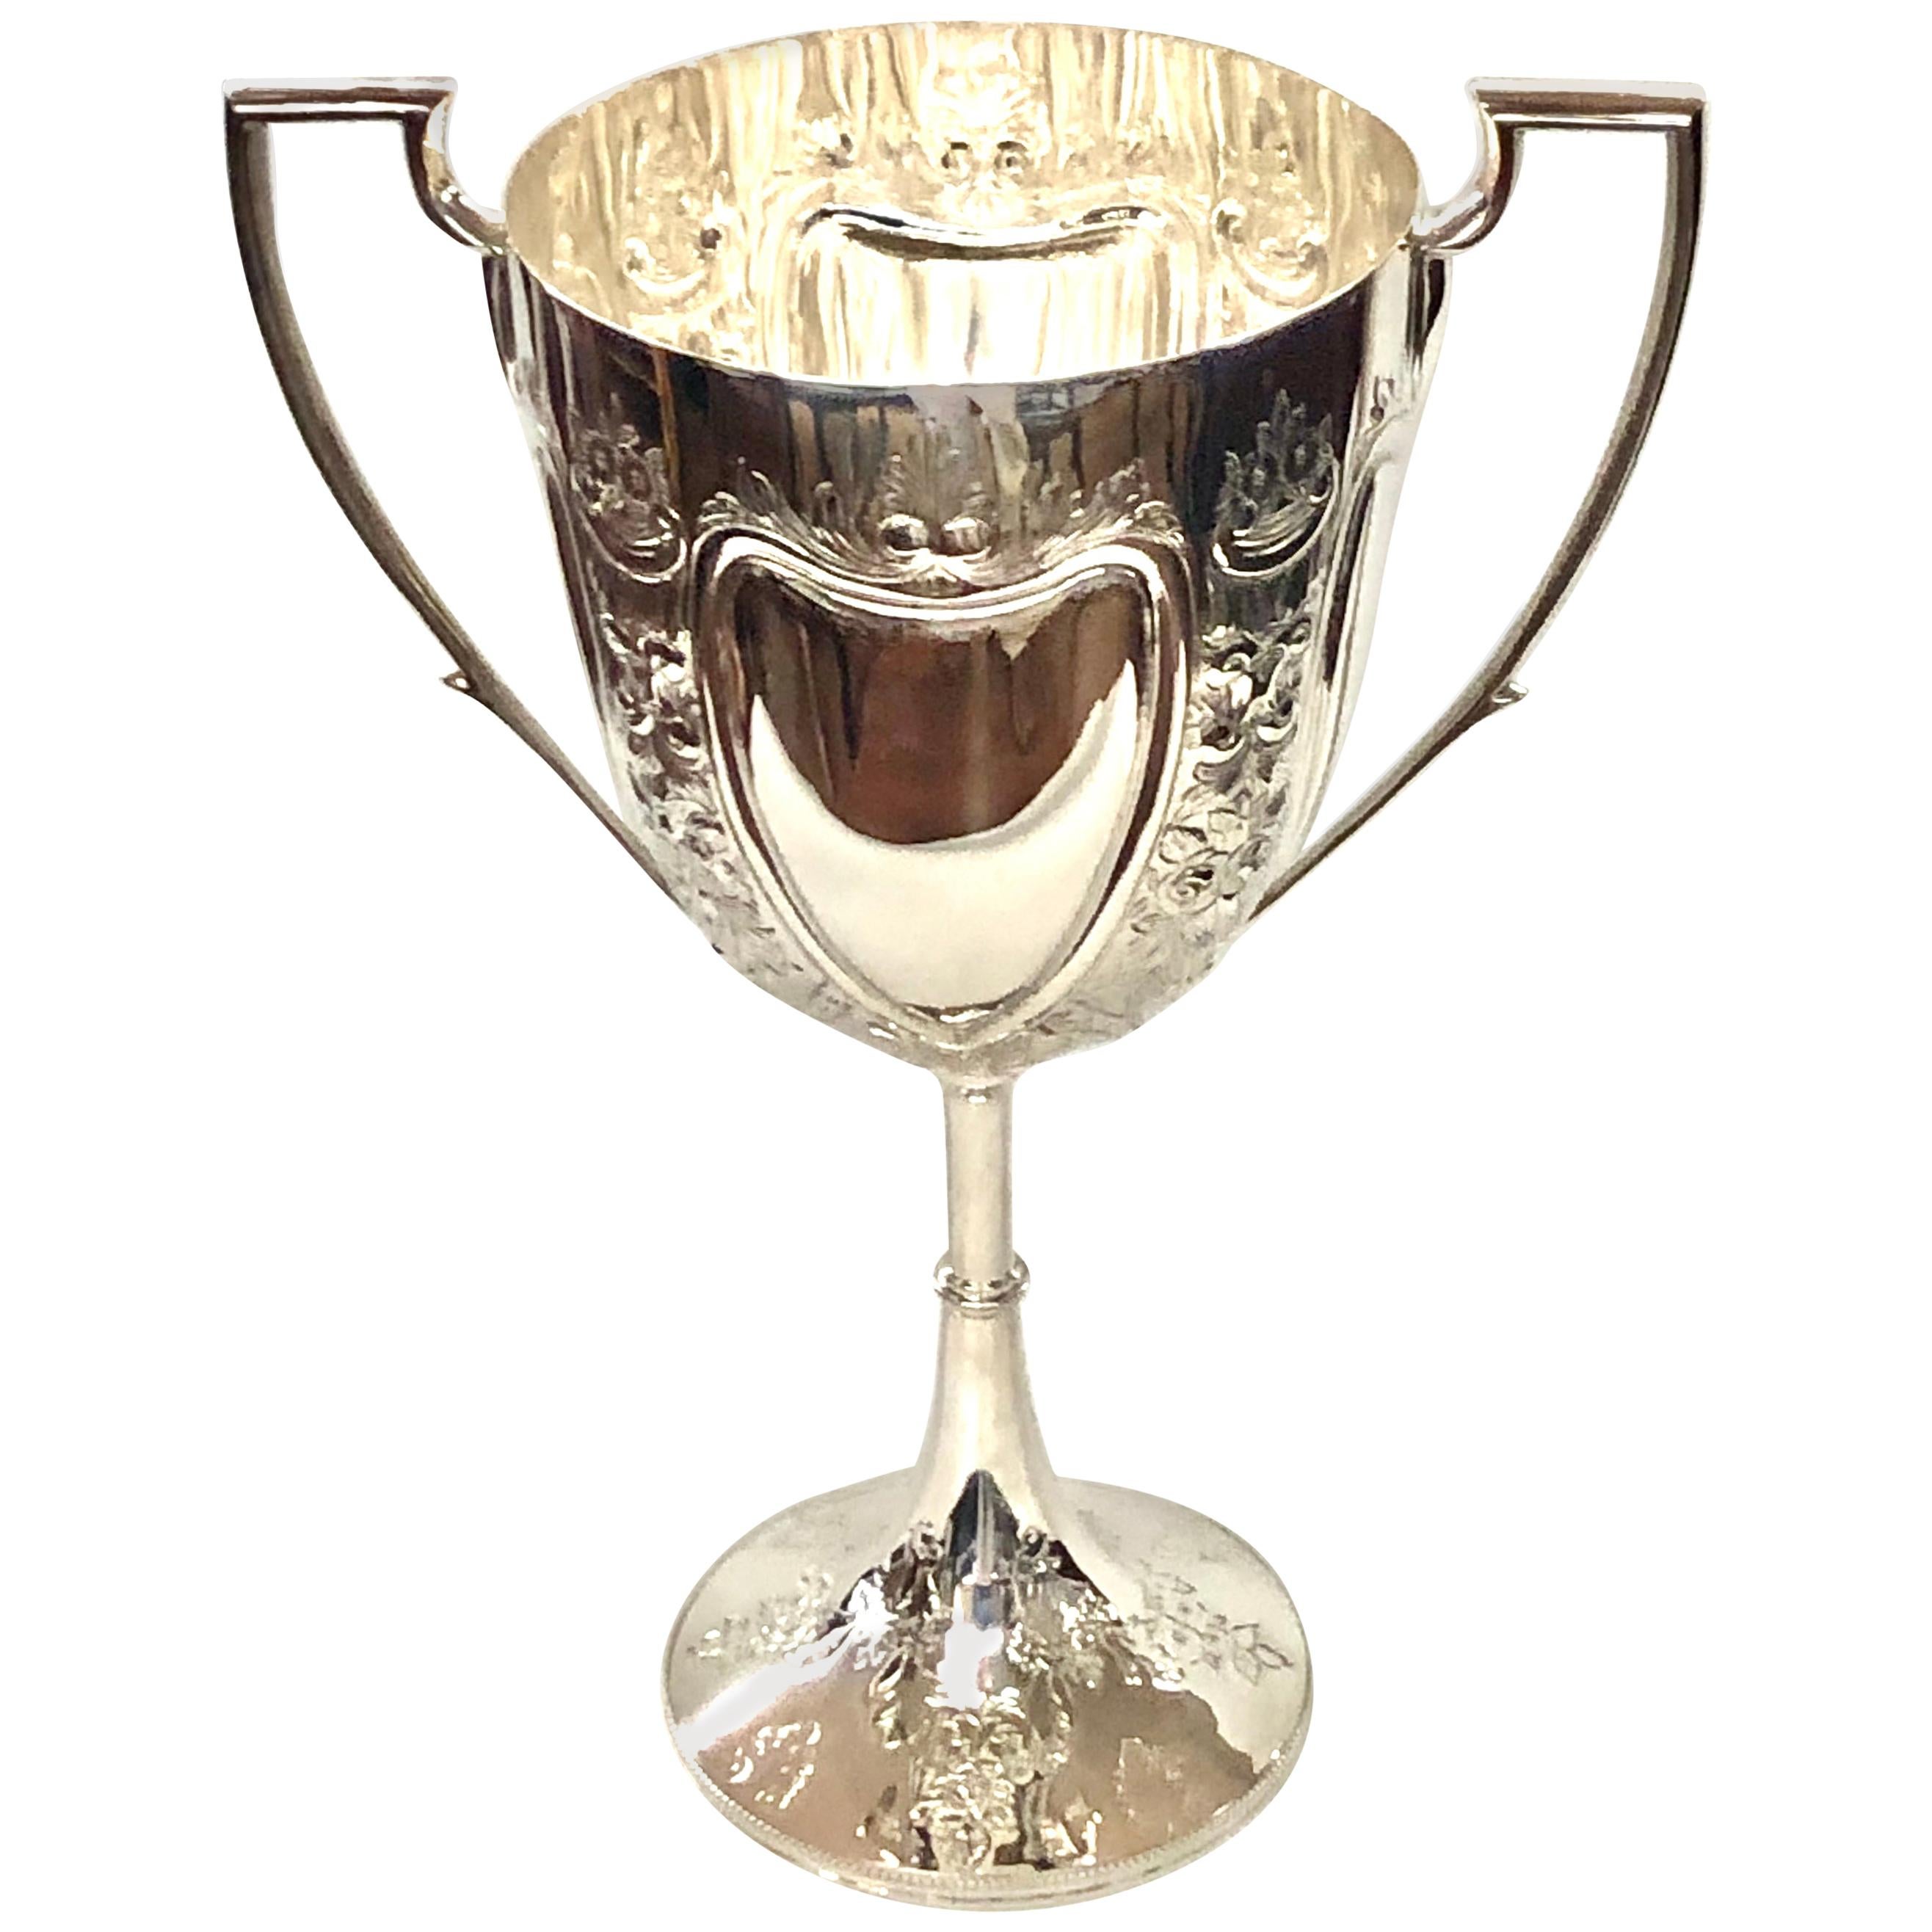 What is the tradition of the loving cup?